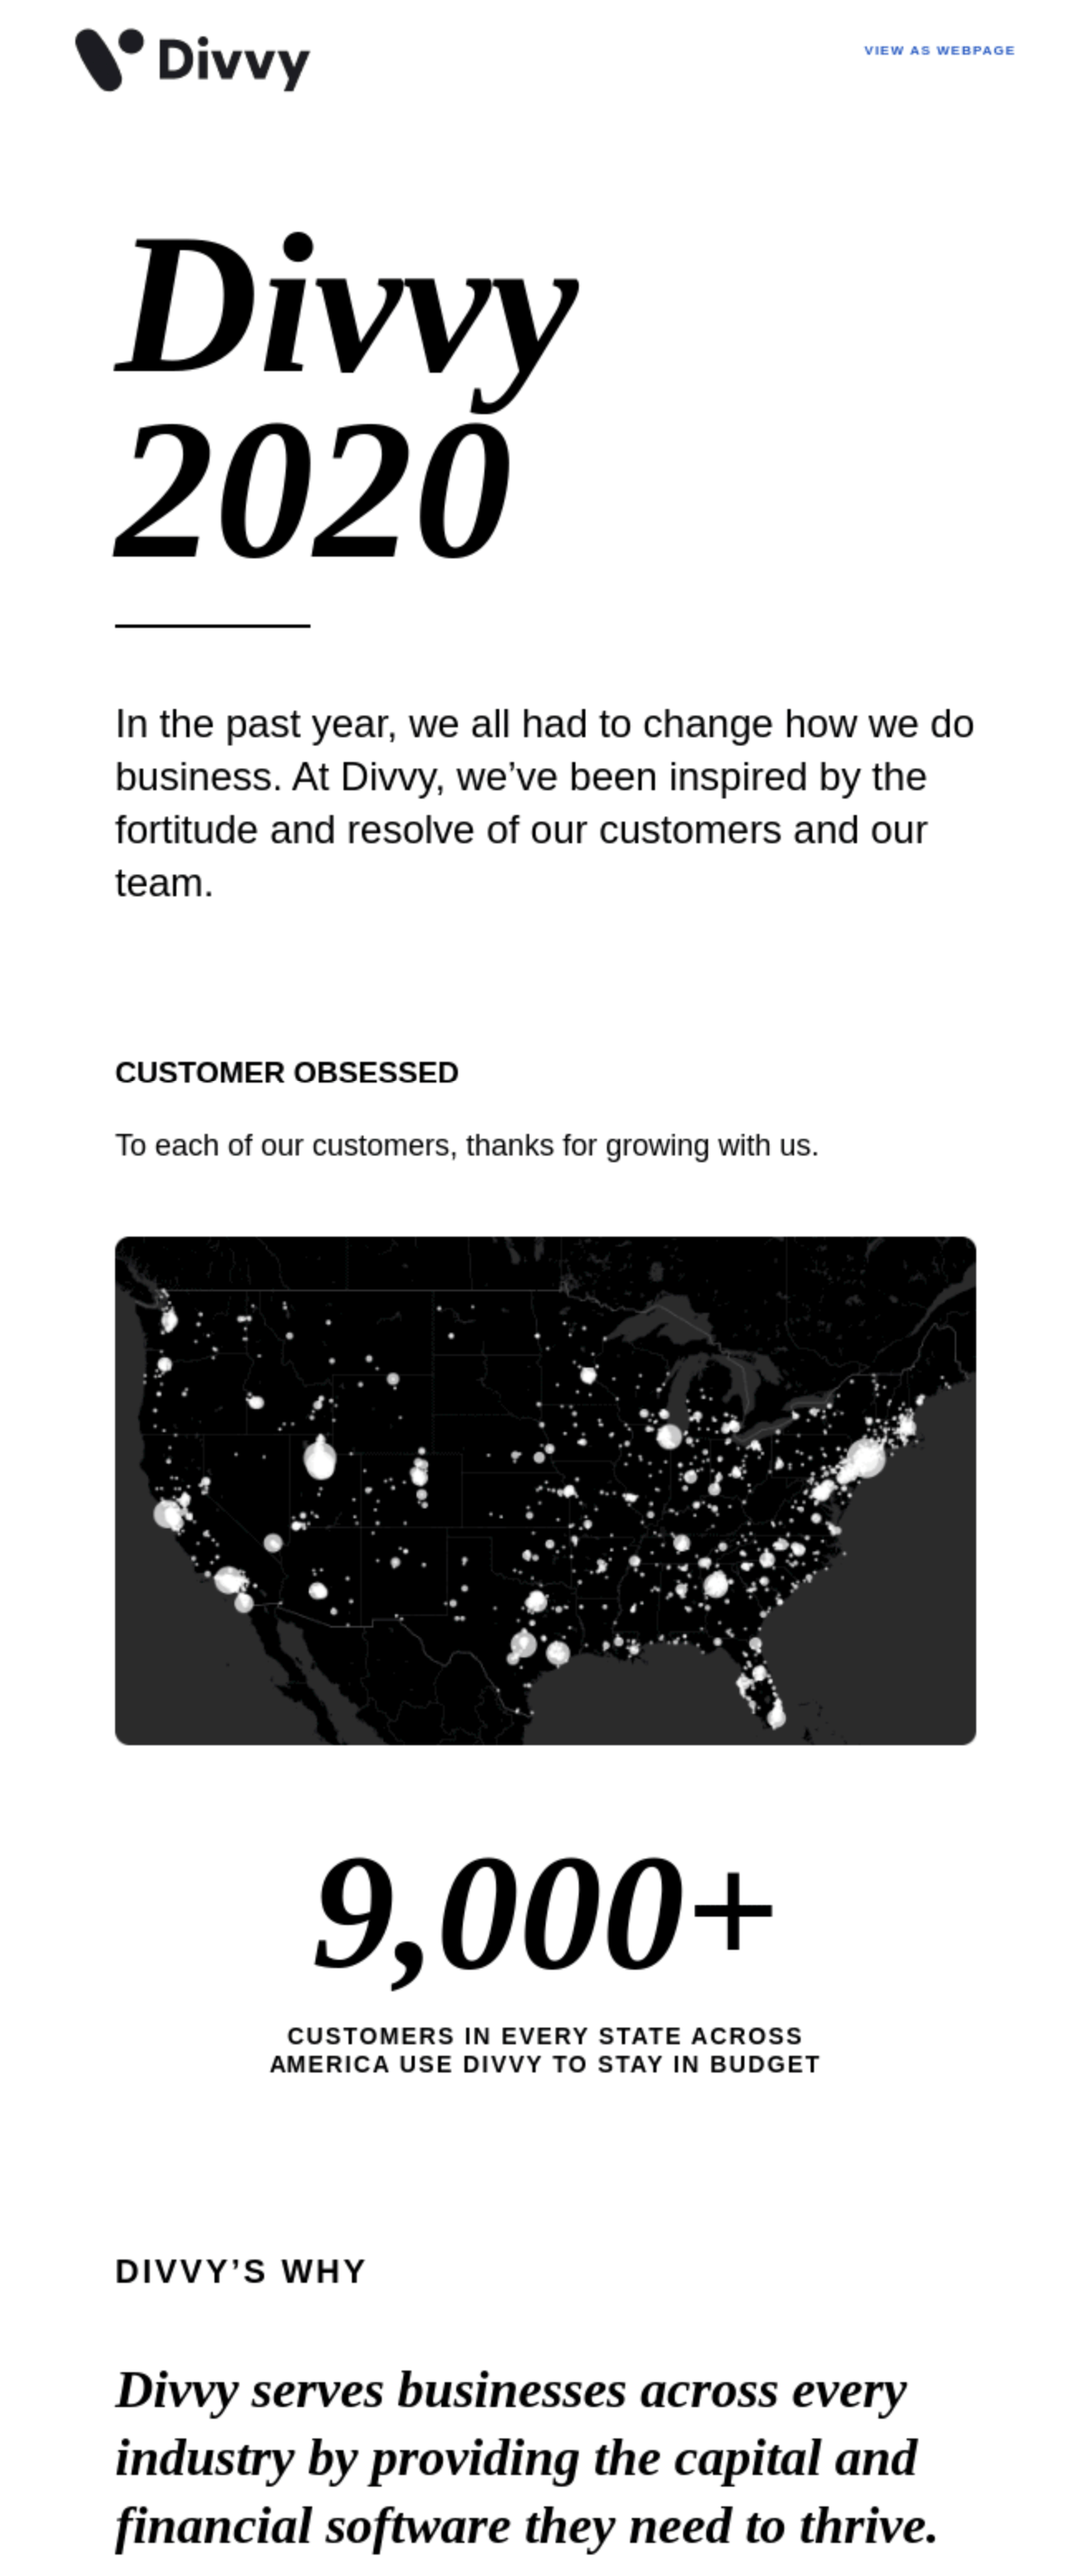 Email Engagement Content Ideas: Screenshot of Divvy's email showing their year in review